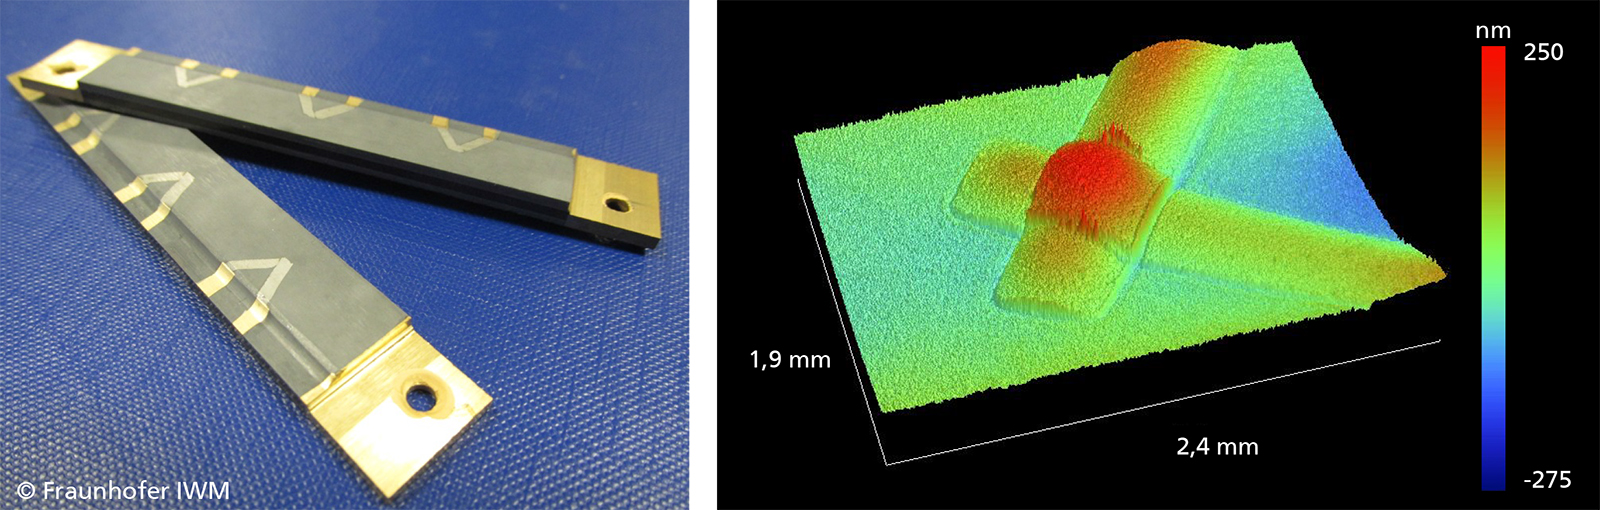 Sealing bars fitted with thin-film sensors (left). White light interferometer image of a measuring point with conducting tracks approx. 250 nm thick and 600 μm wide (right). 